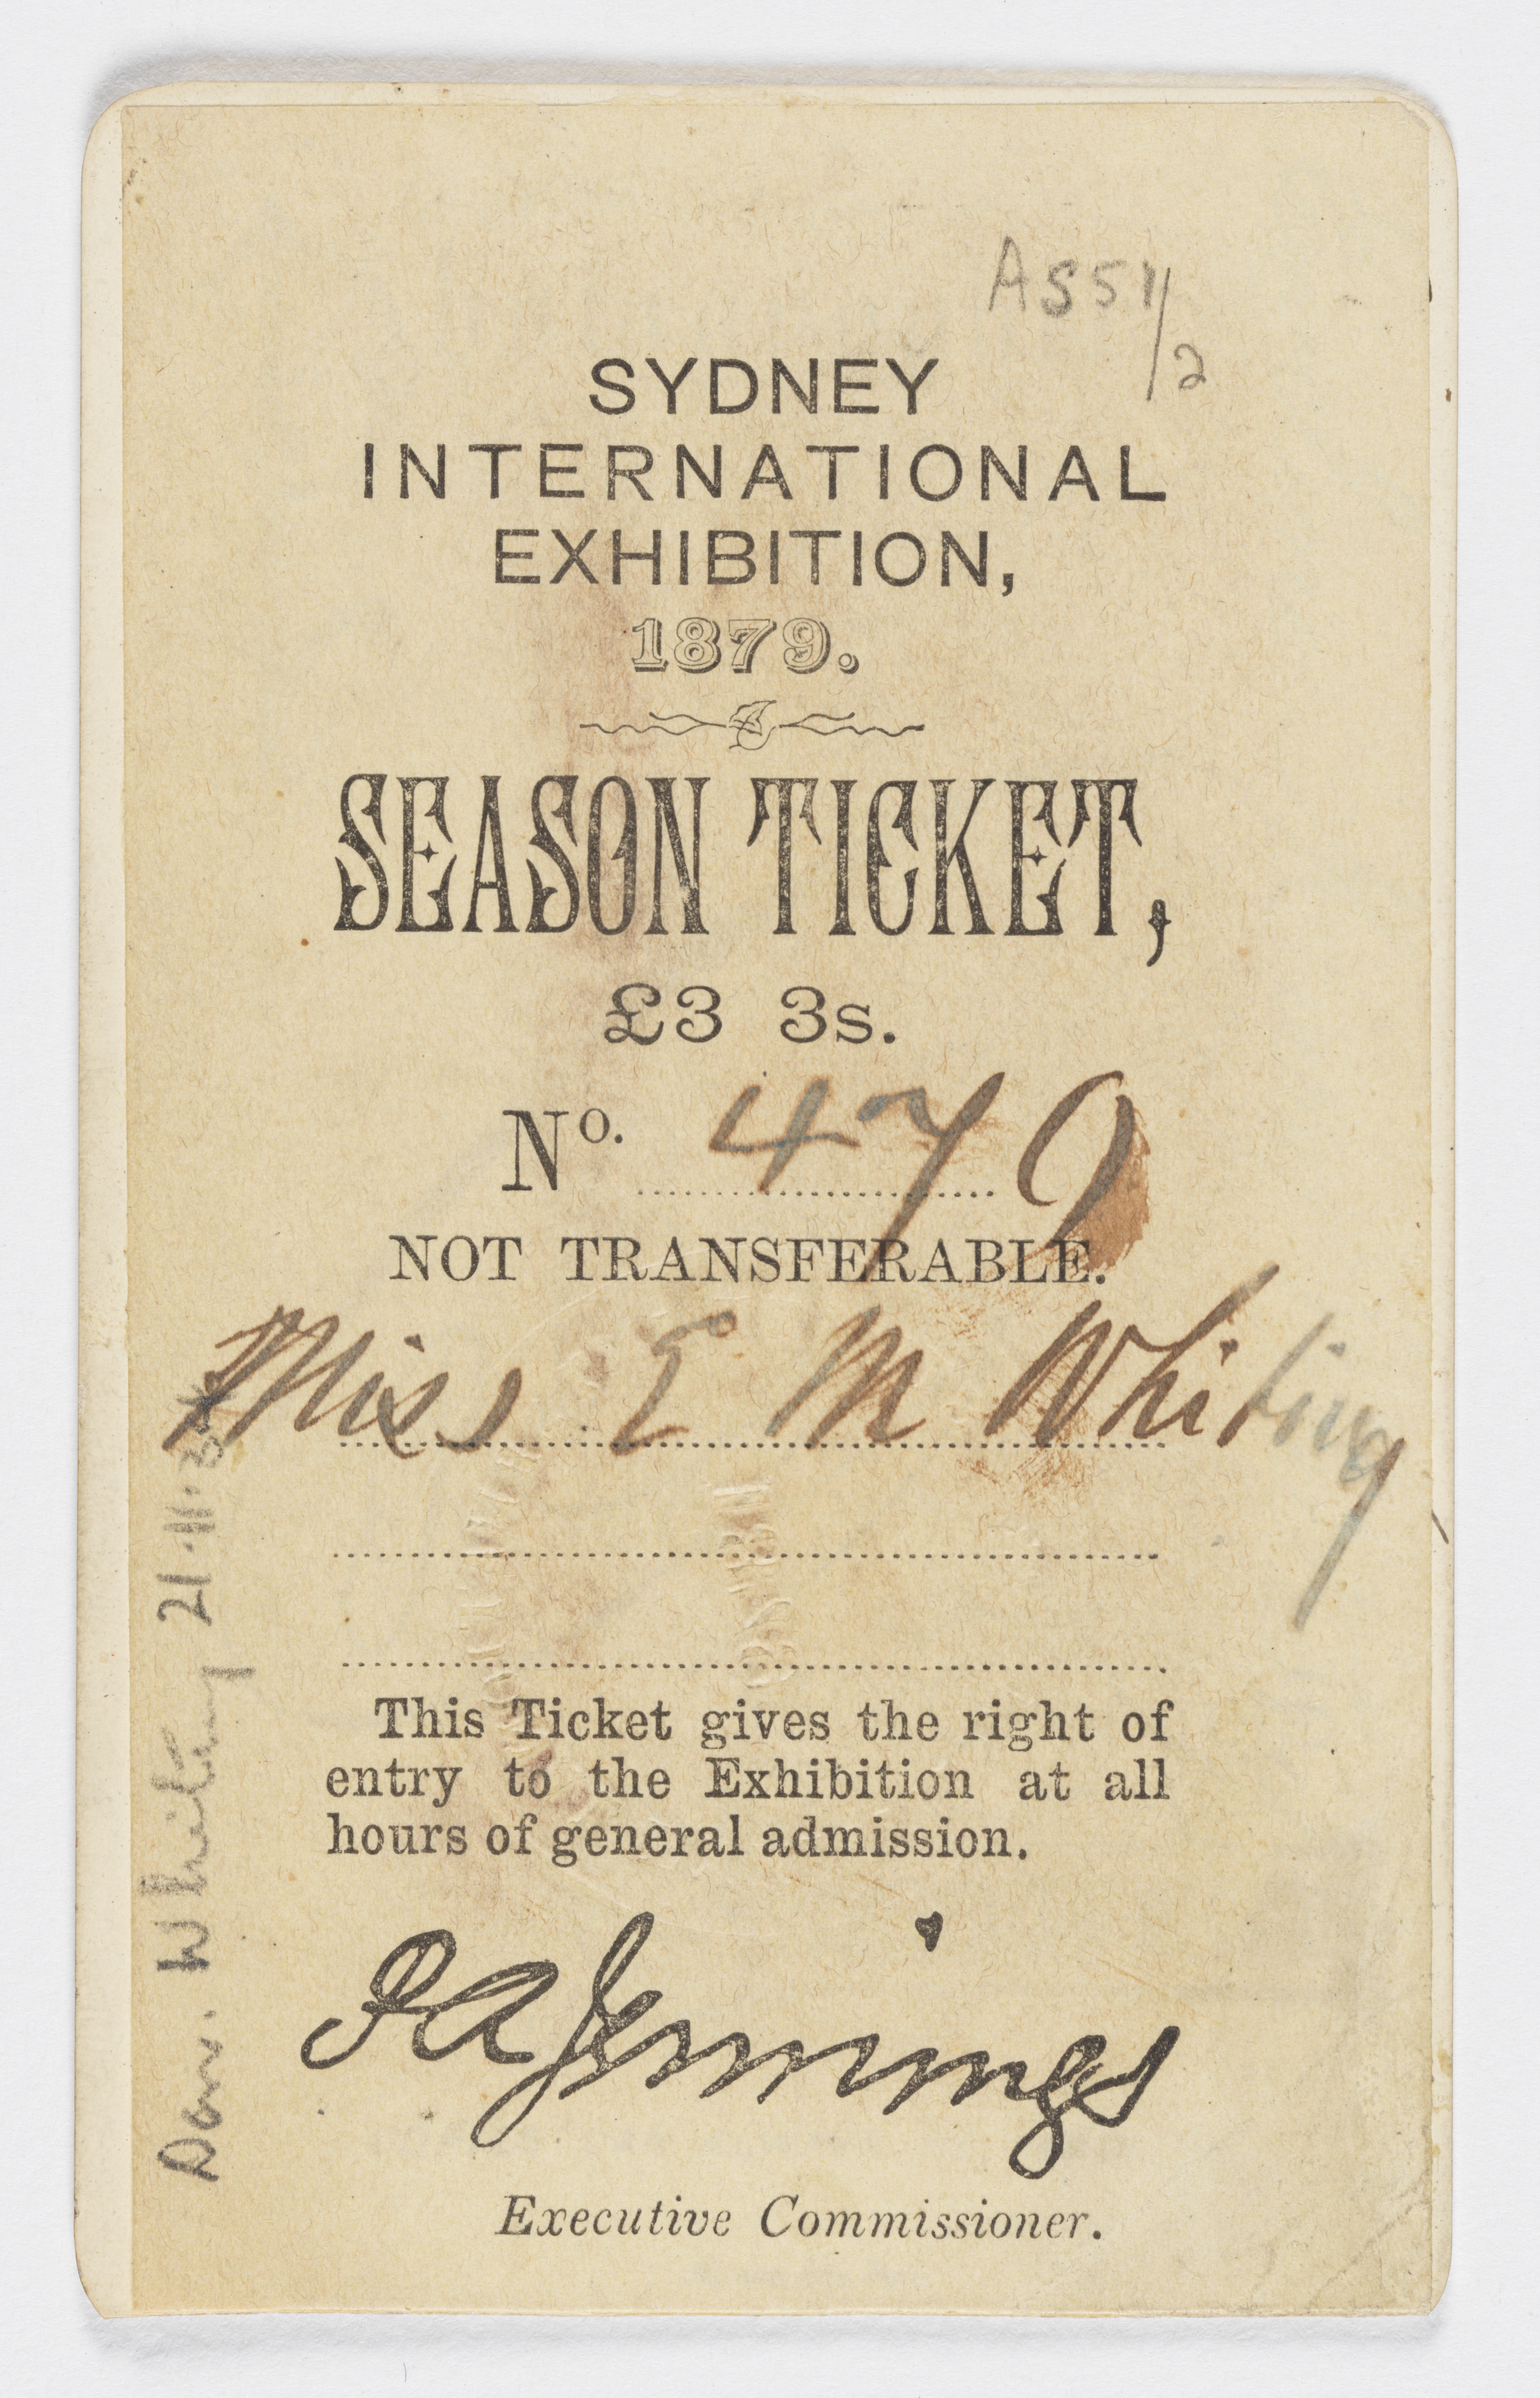 Season ticket issued to Eveline Mary Whiting for the International Exhibition